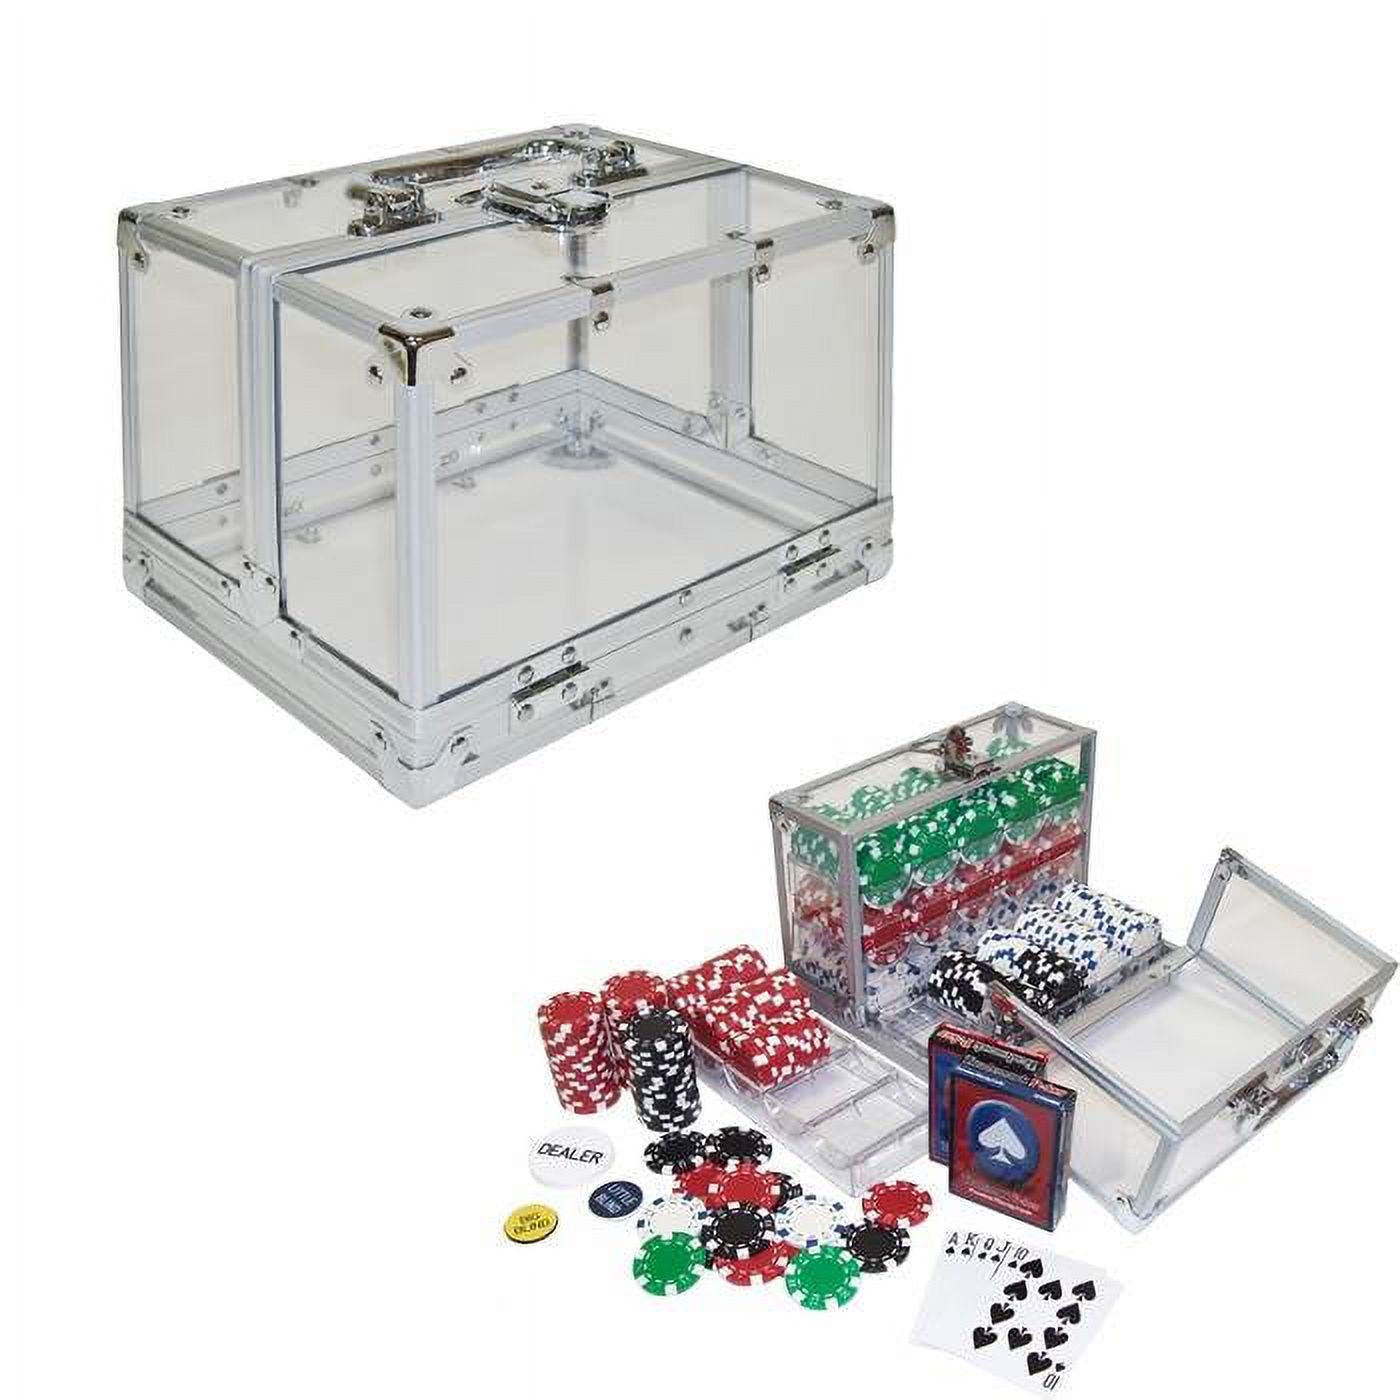 Trademark 600-Piece Clear Acrylic Case - Holds 6 Chip Trays Poker Chip Case (Clear) - image 2 of 3